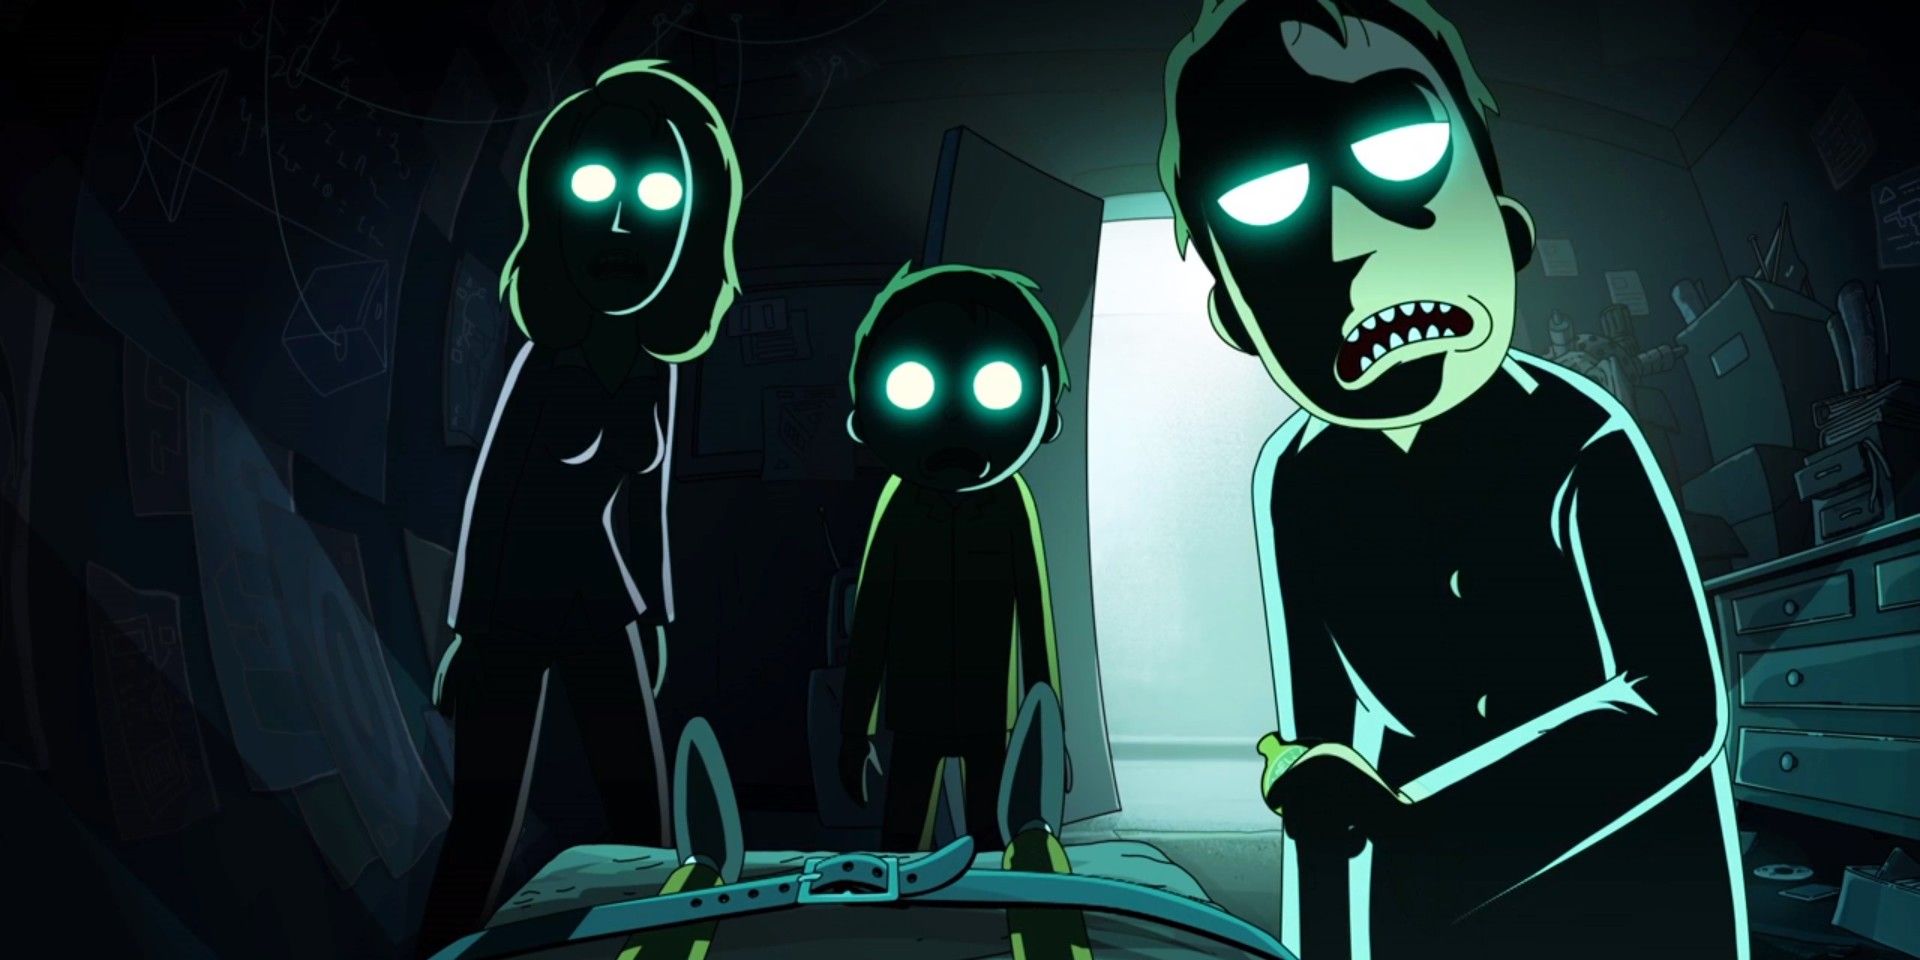 The Night Family from Rick and Morty season 6 episode 4,